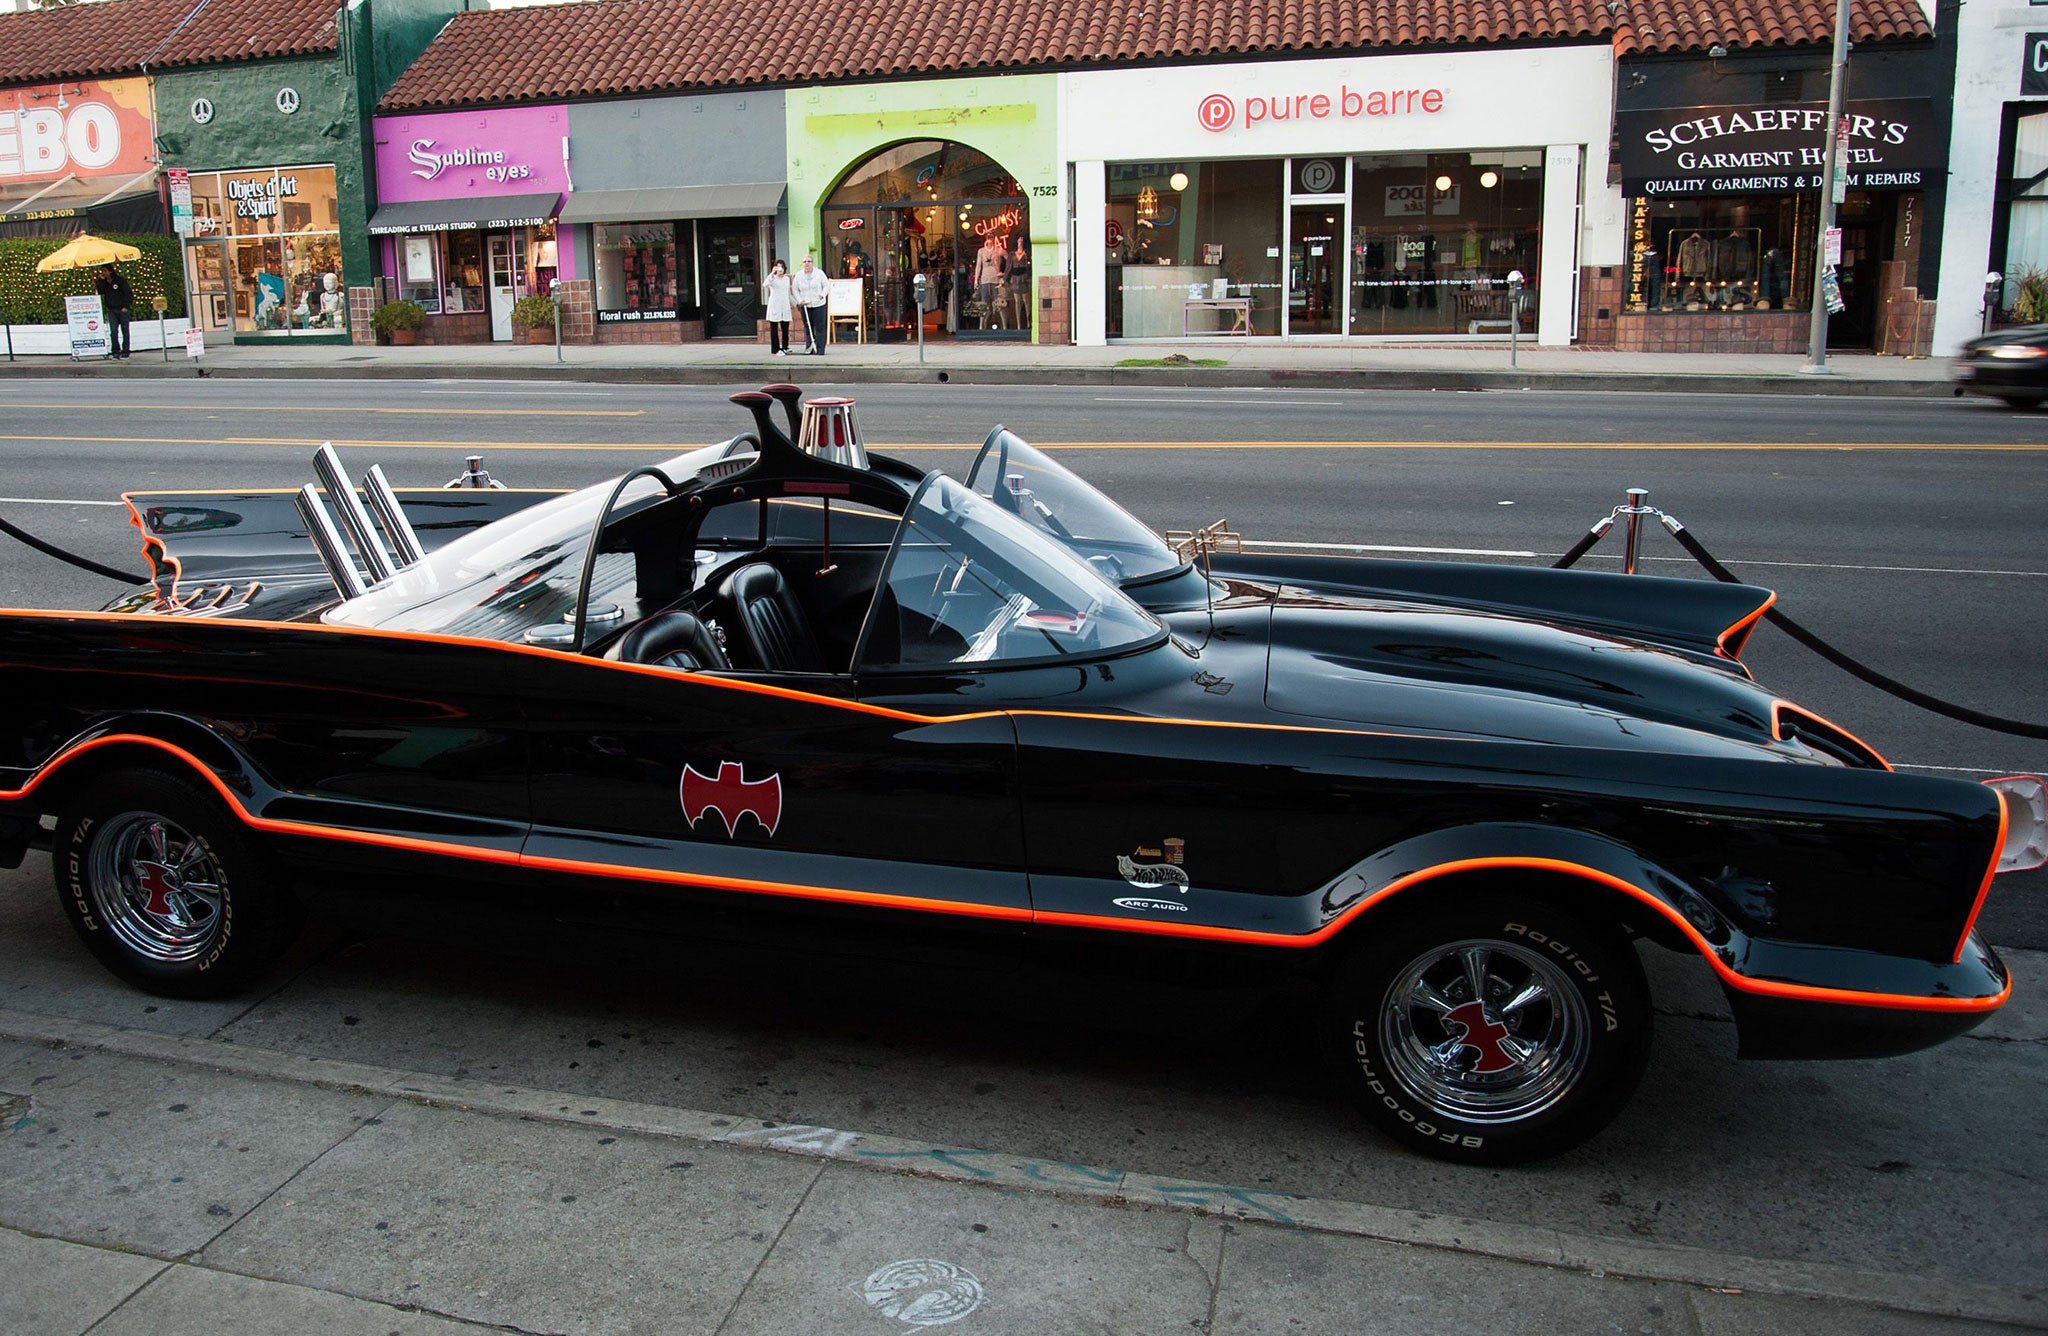 This Batmobile was first sold in 2013 for a reported $4.6m